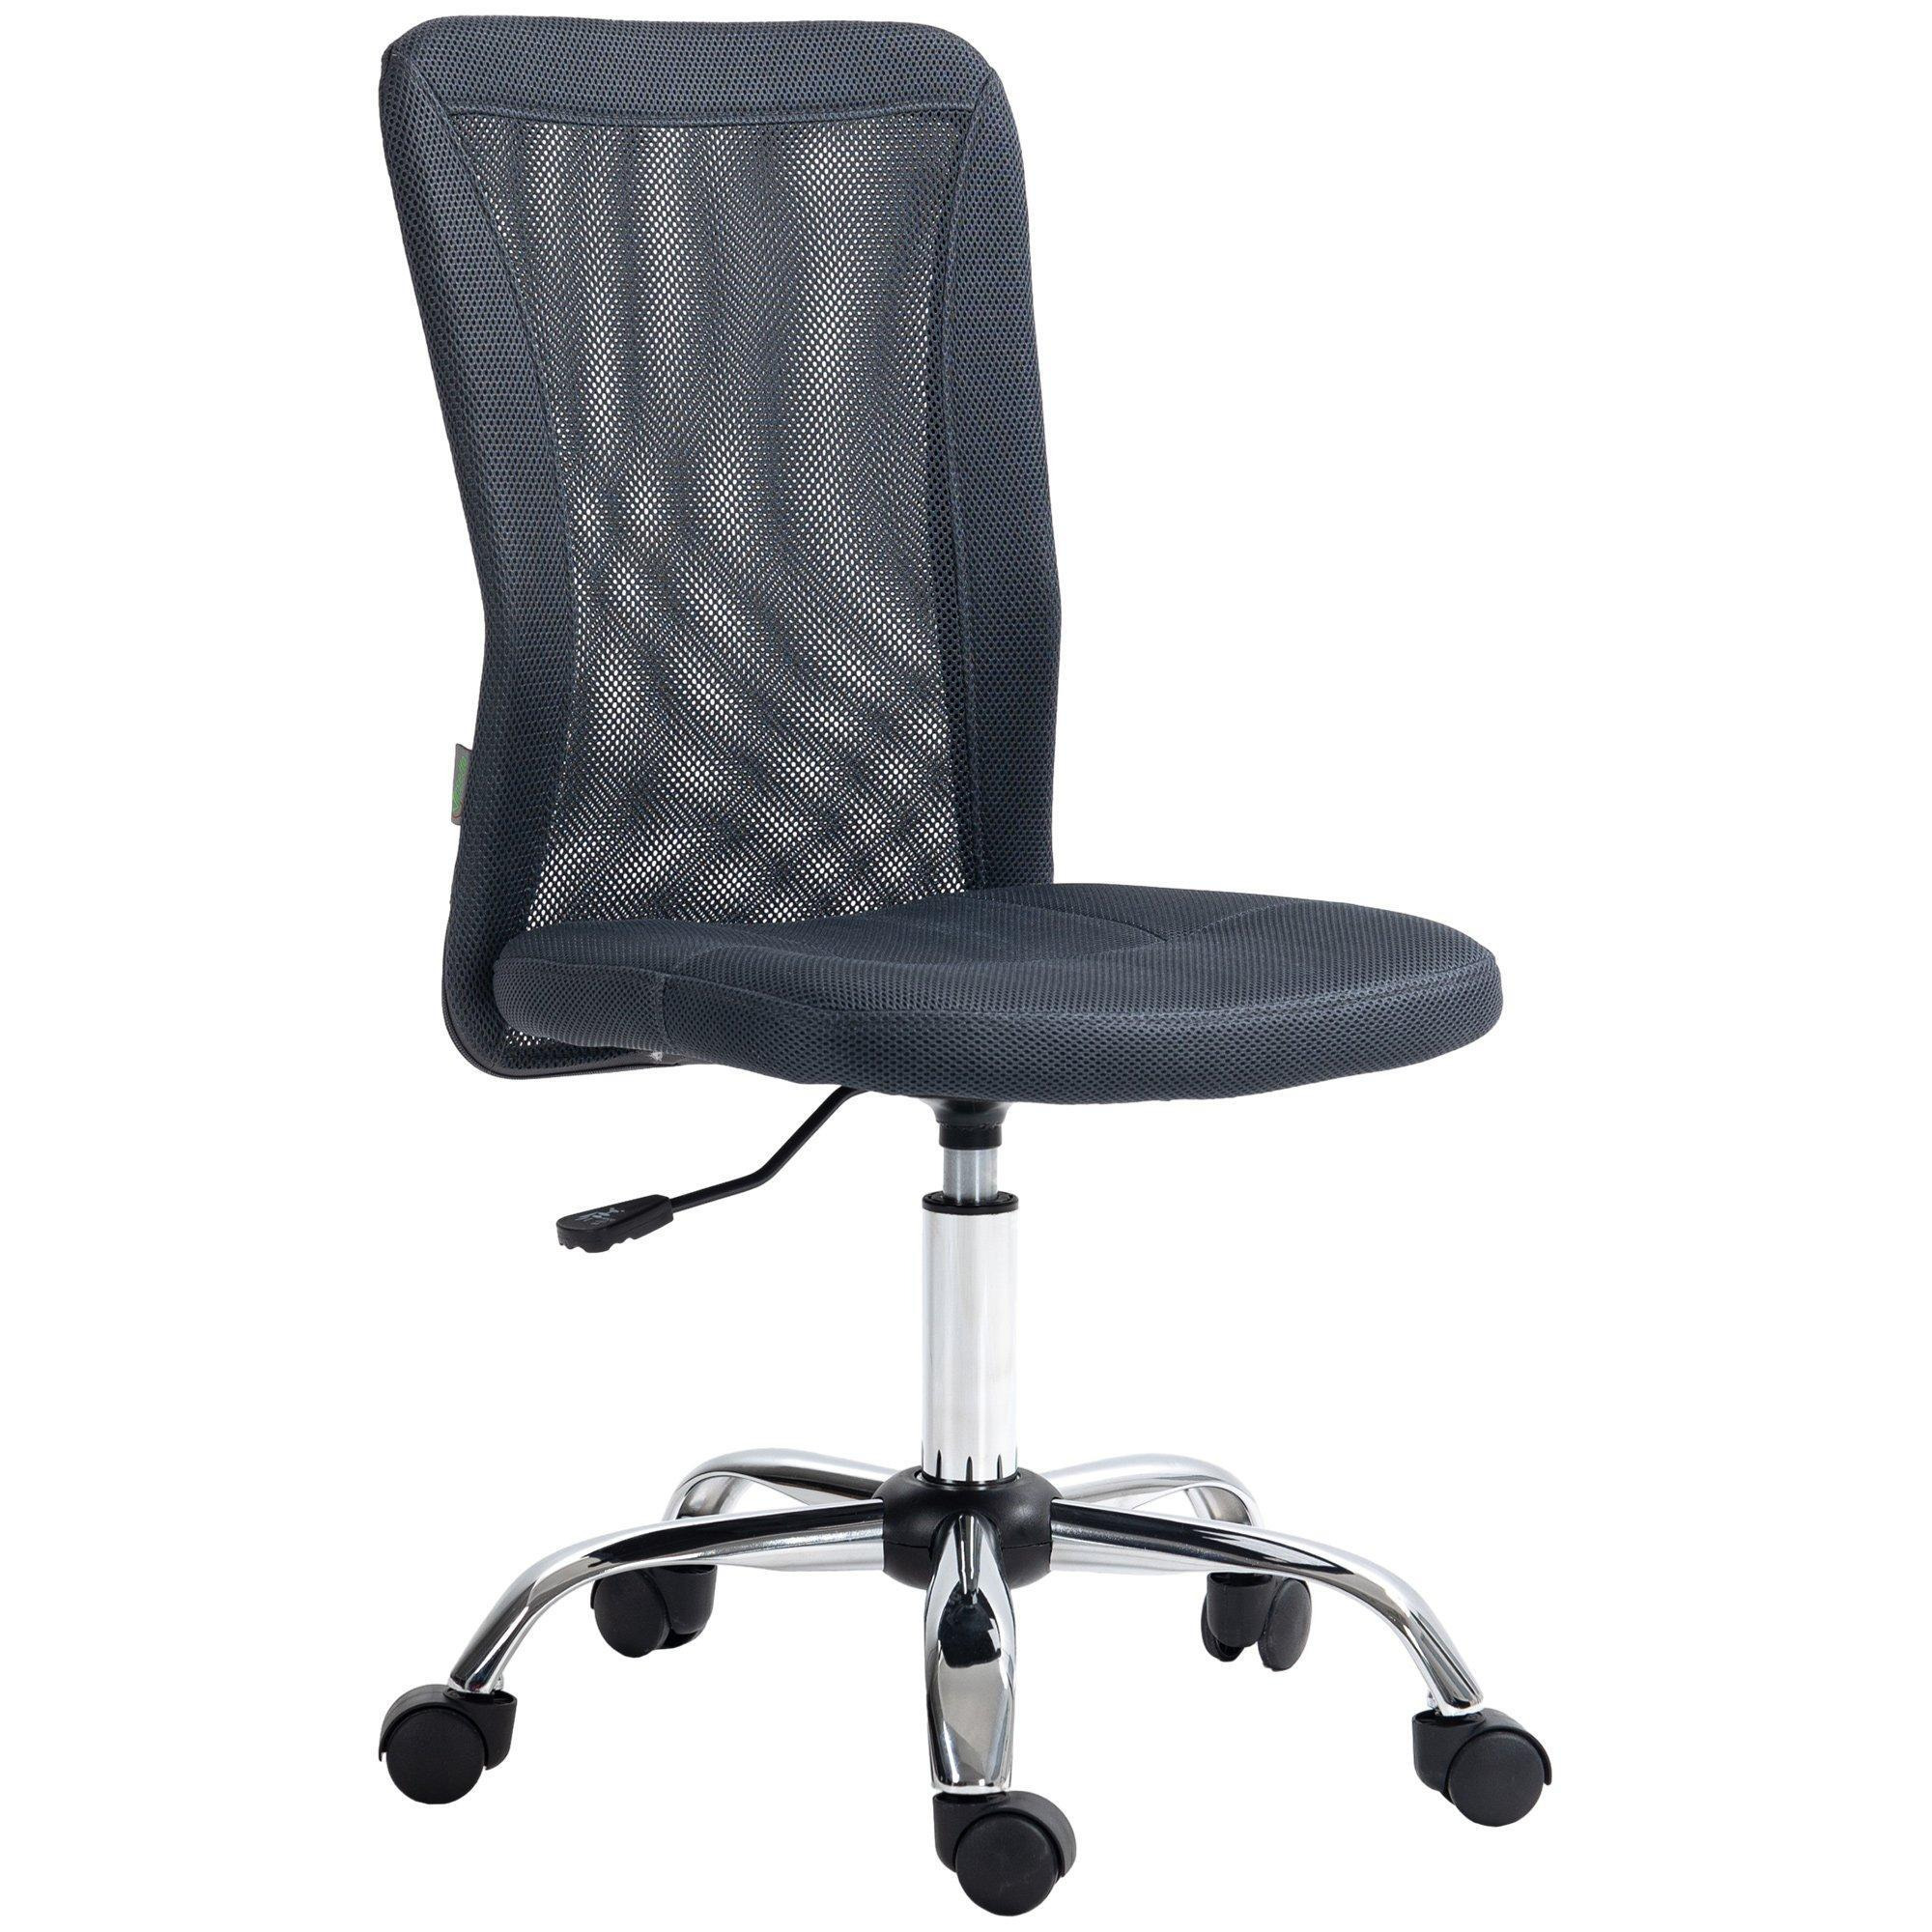 Armless Desk Chair Height Adjustable Mesh Office Chair with 5 Wheels - image 1